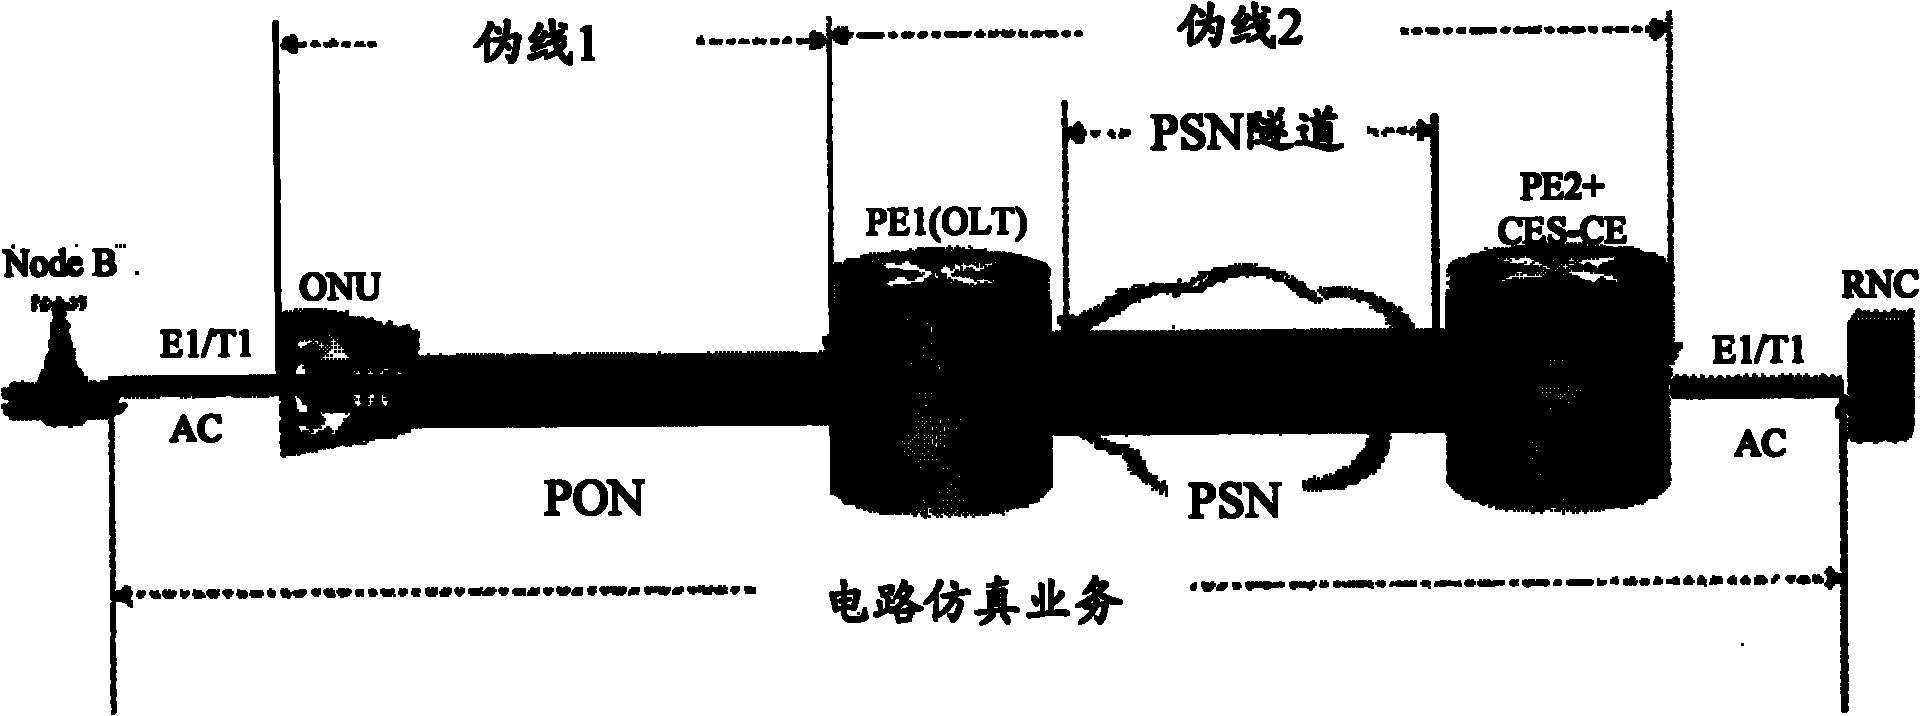 PTN (Packet Transport Network) equipment and CES (Circuit Emulation Service) equipment